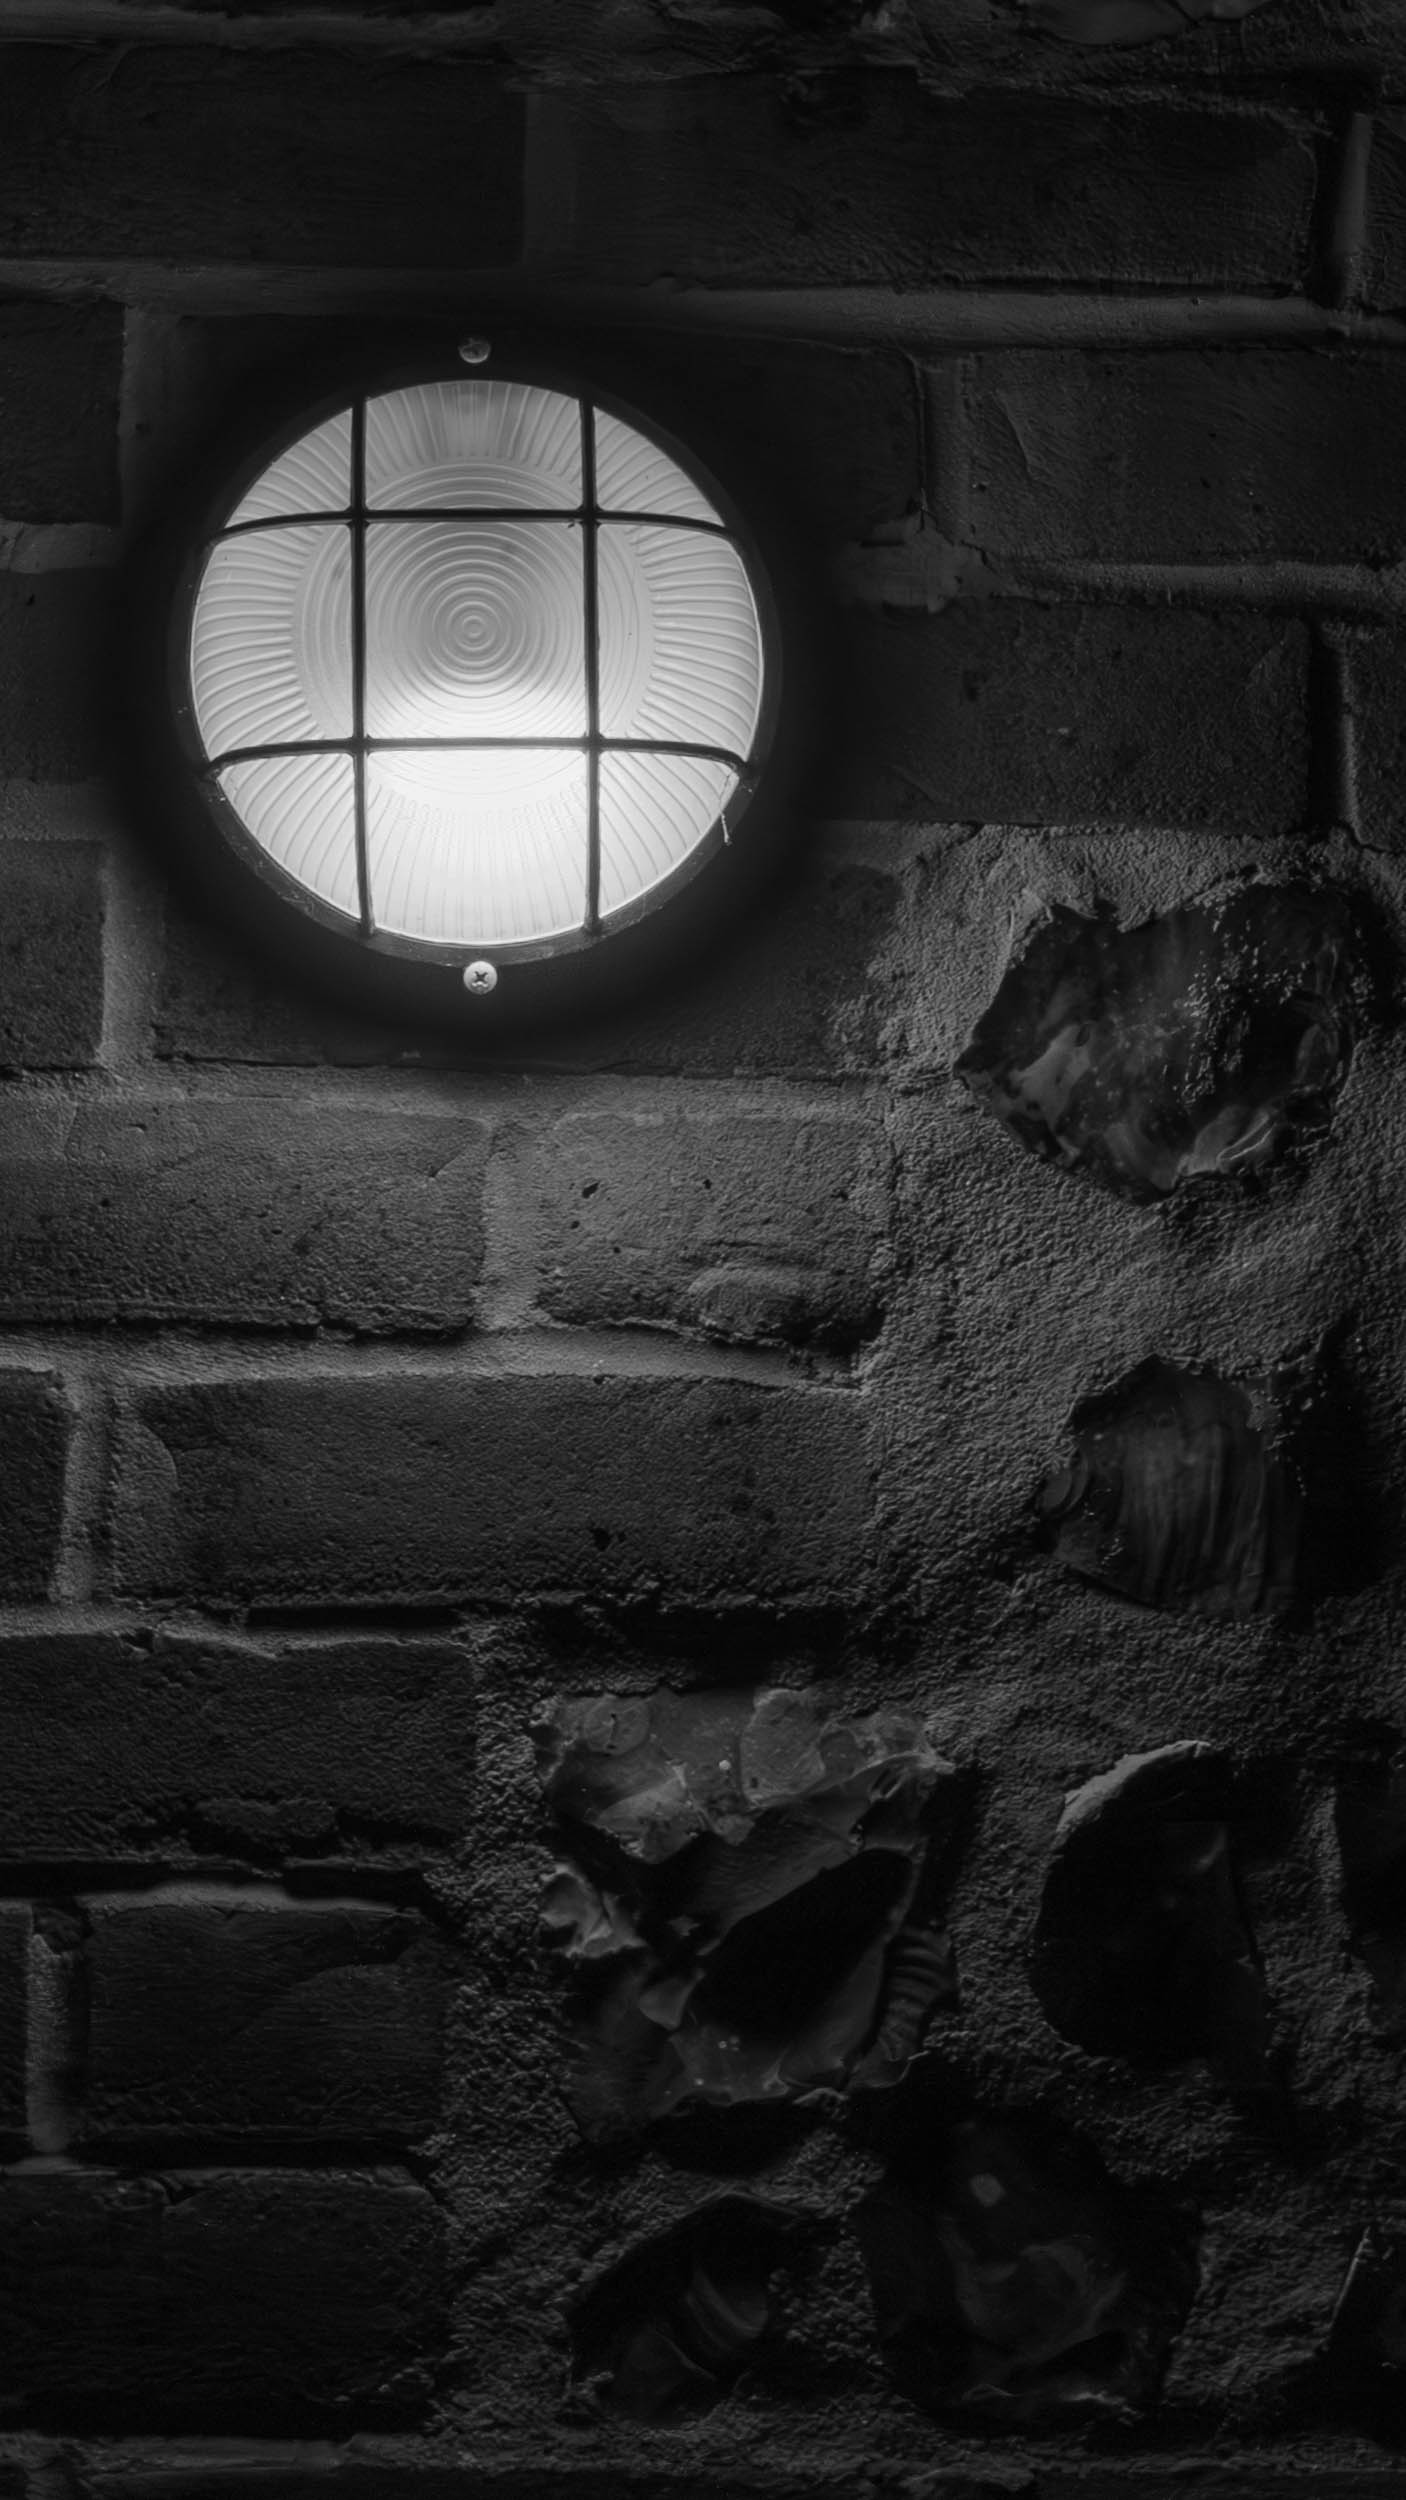 Black and White image of industrial-tyle outside light on a brick and flint wall.